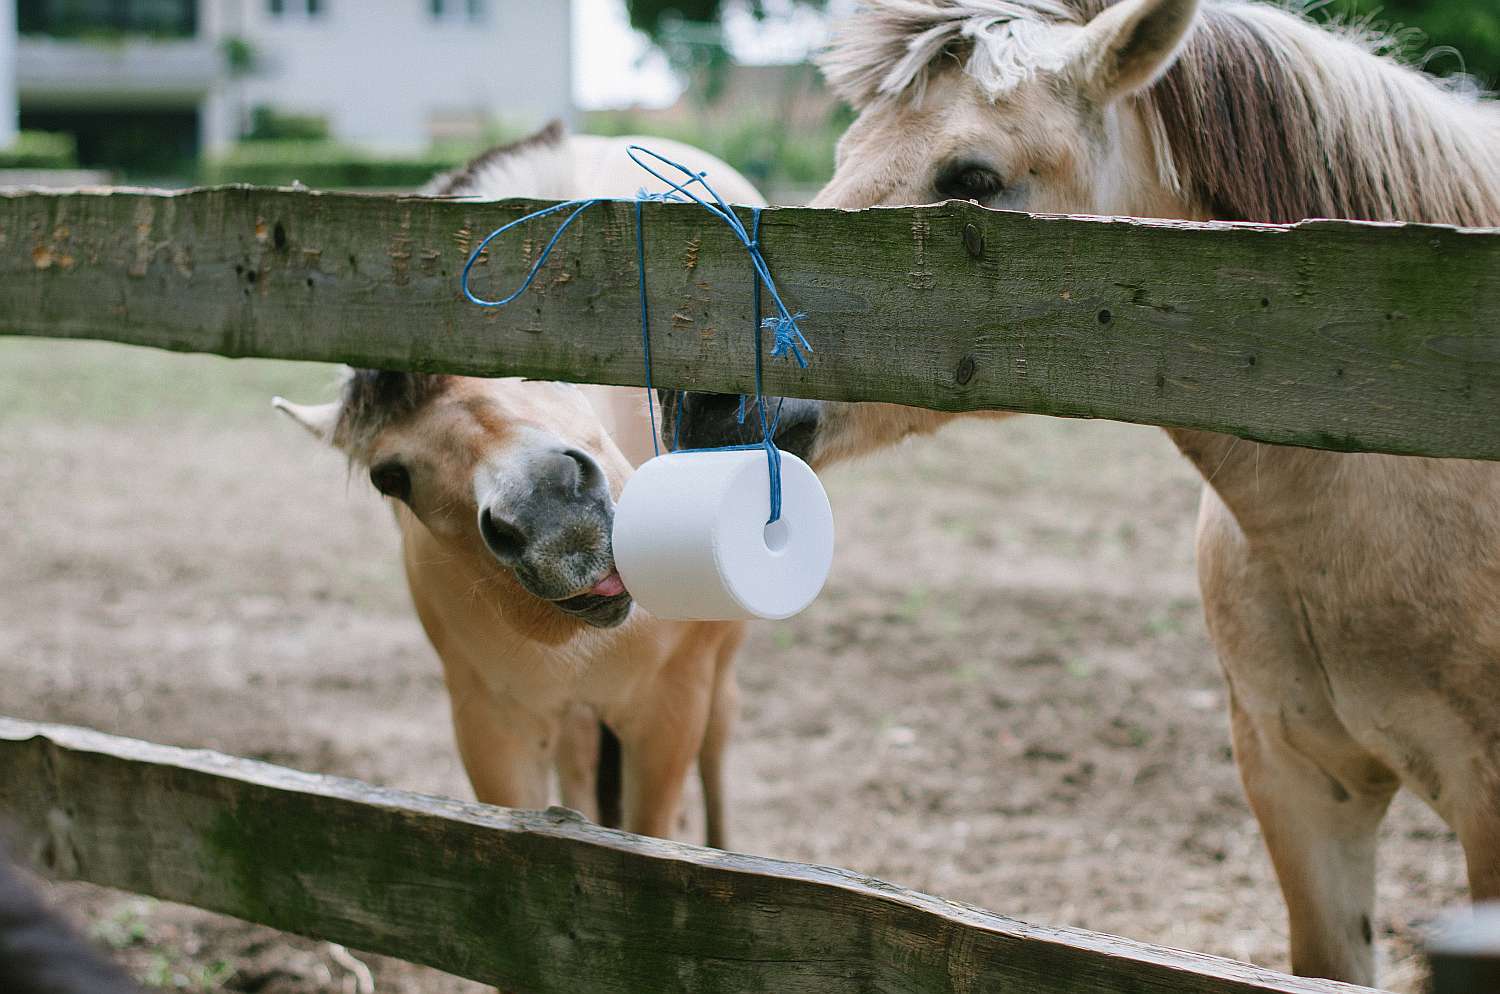 Ponies licking a round salt lick tied to a fence